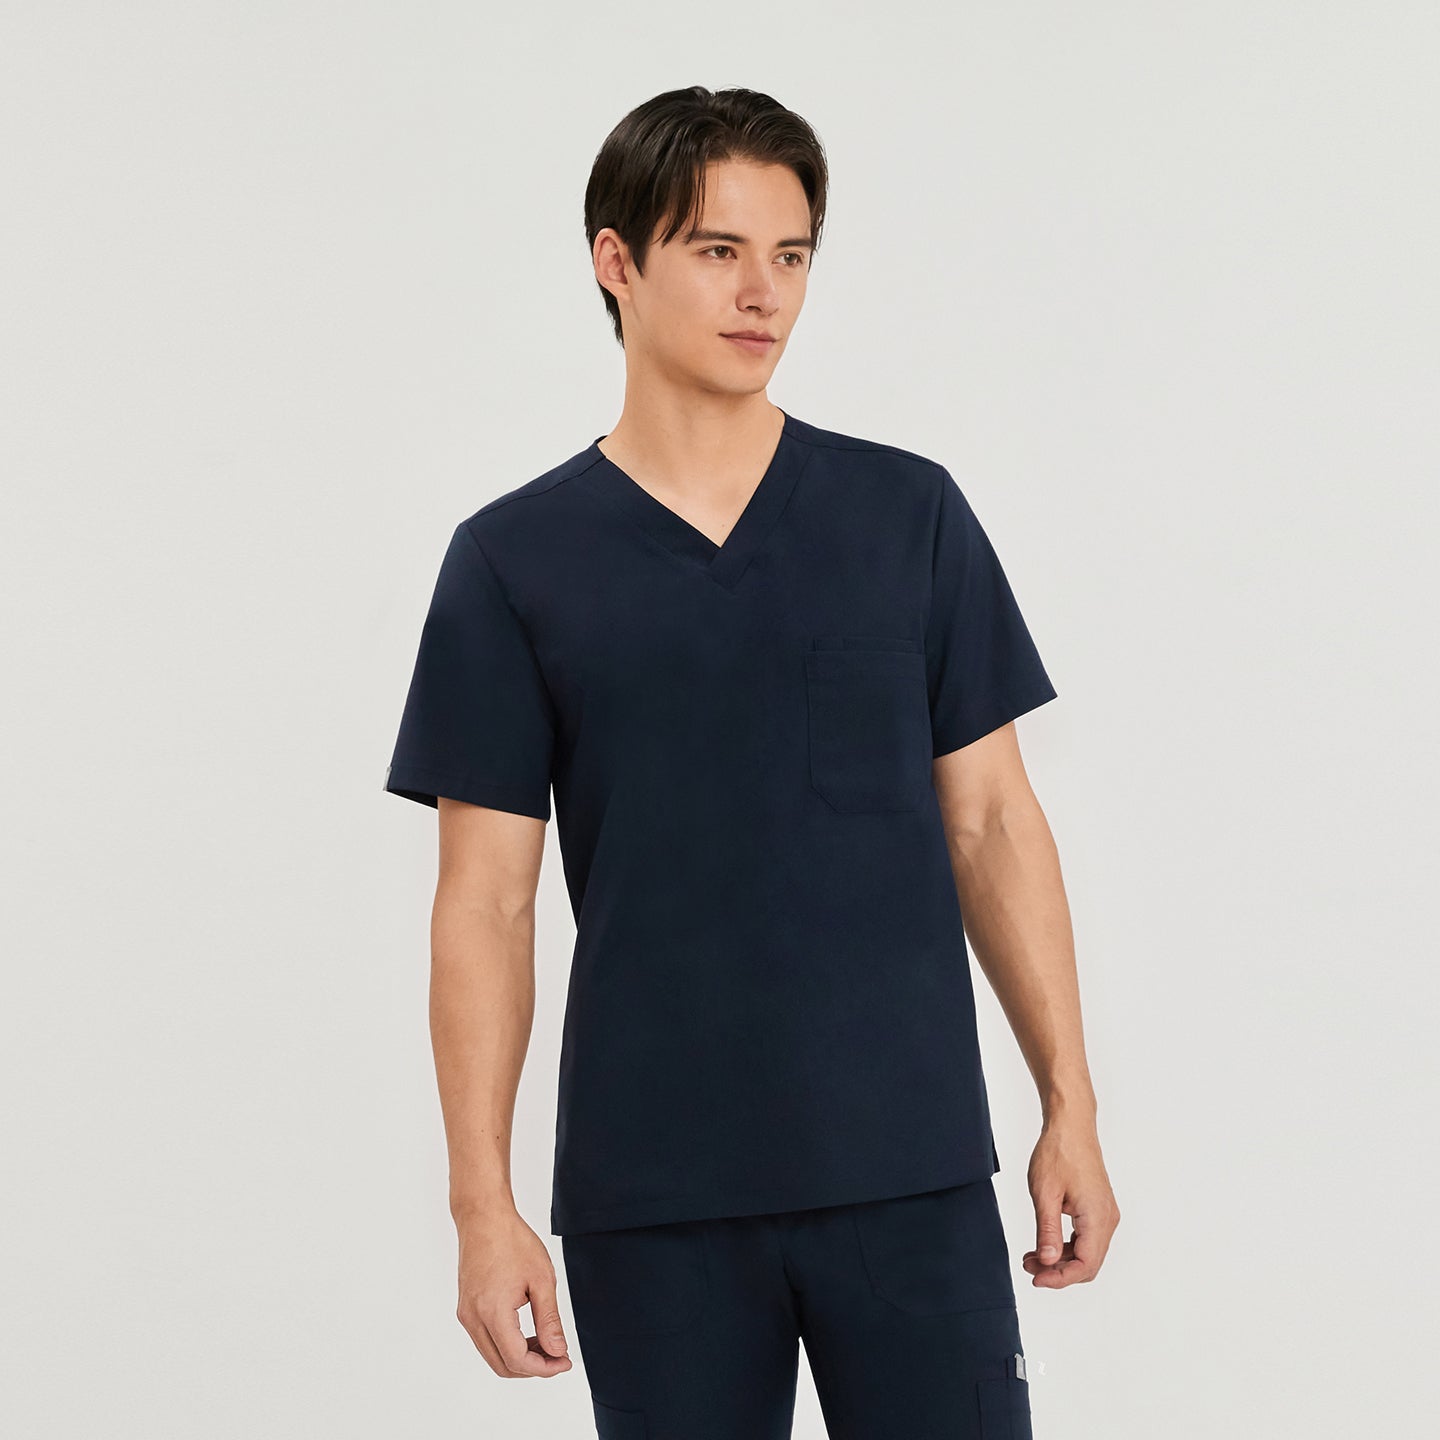 Male model wearing a navy scrub top with a V-neck and a single chest pocket, standing against a plain background,Navy